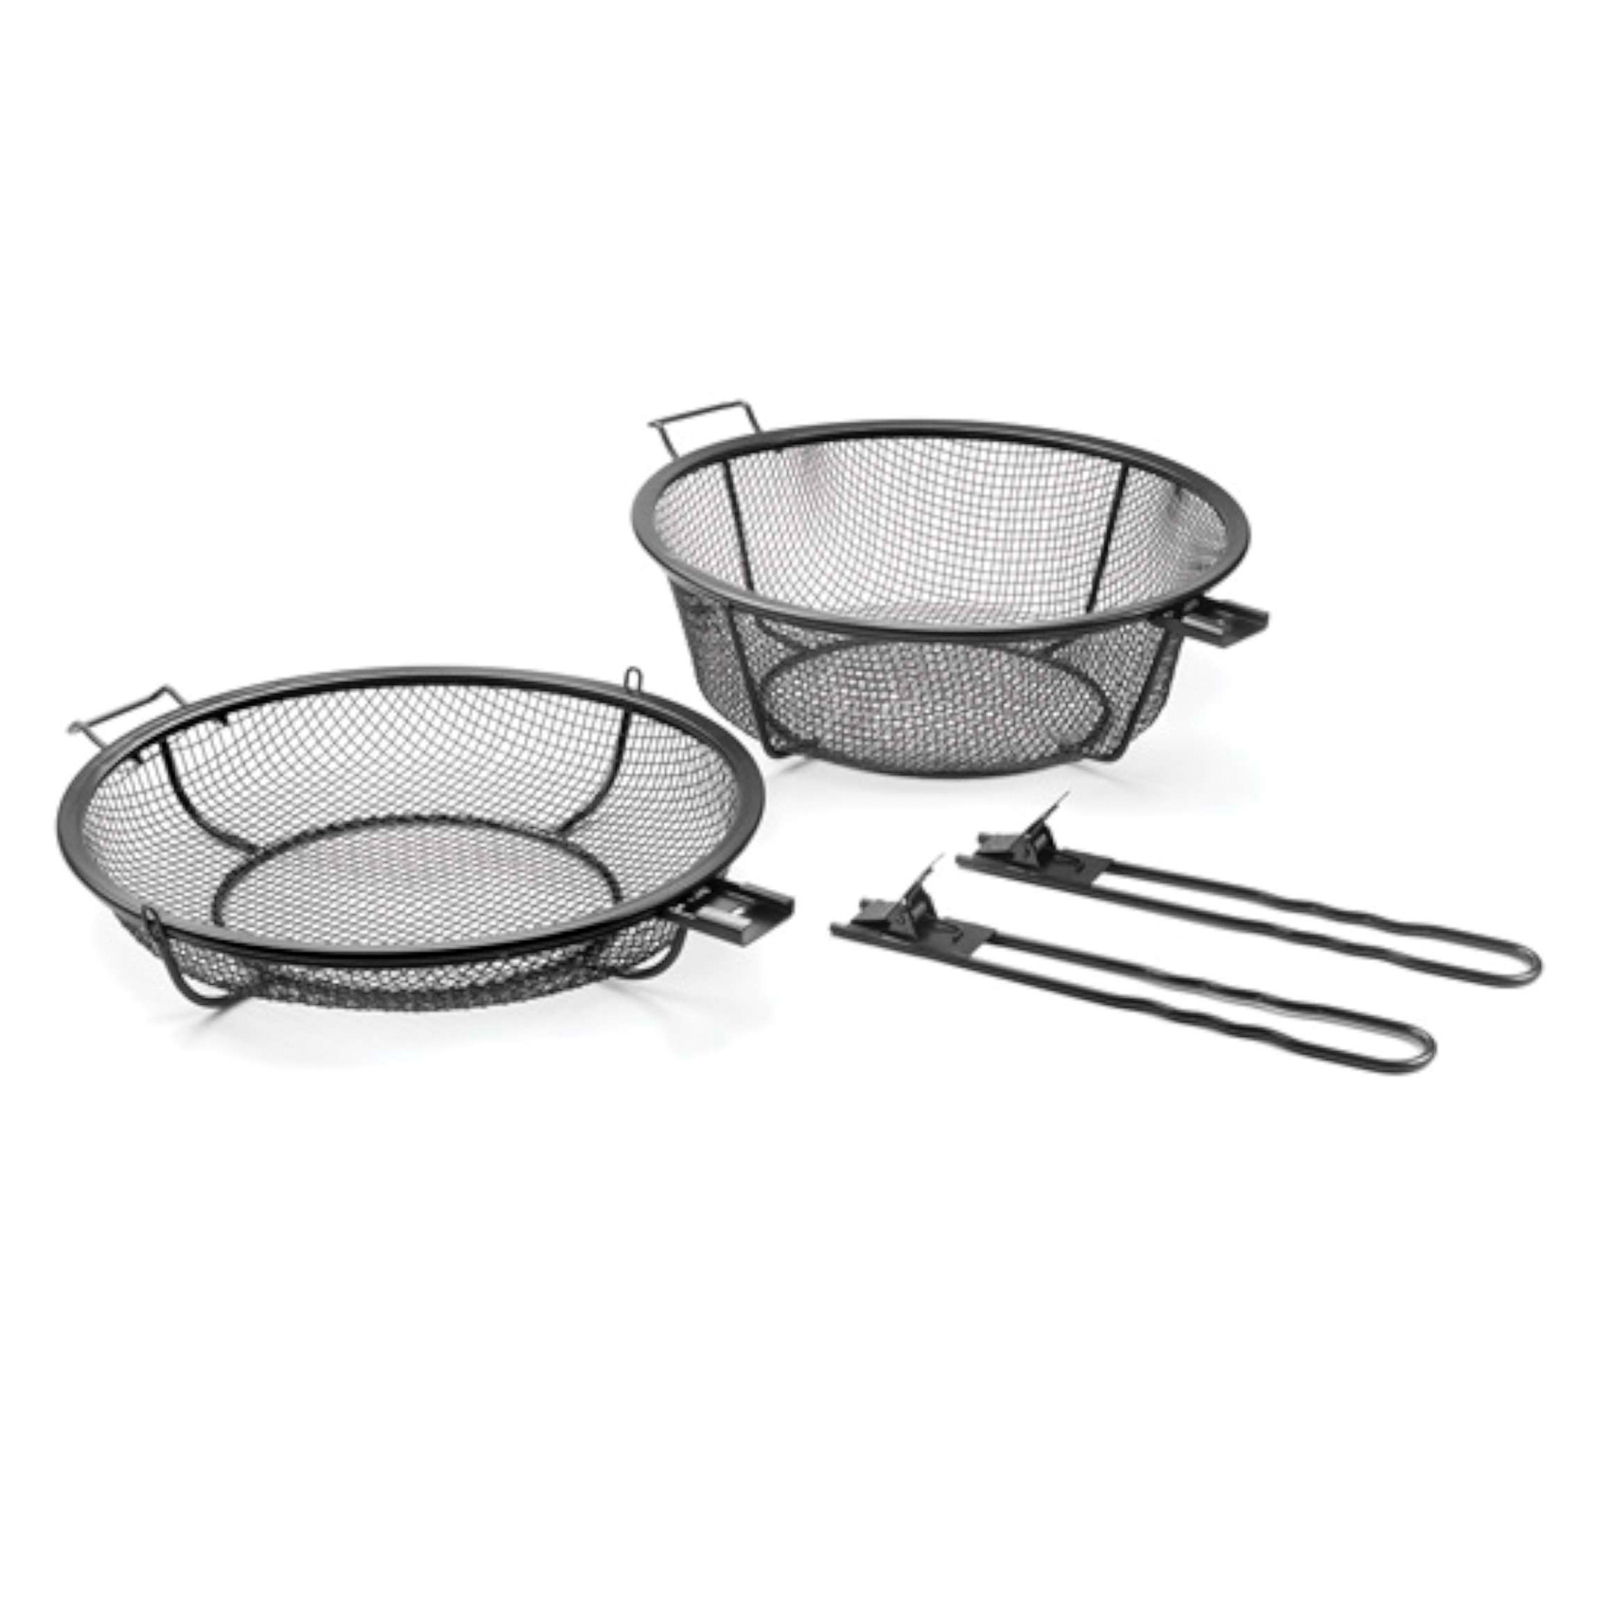 Outset Non-stick Chef's Jumbo Outdoor Grill Basket and Skillet